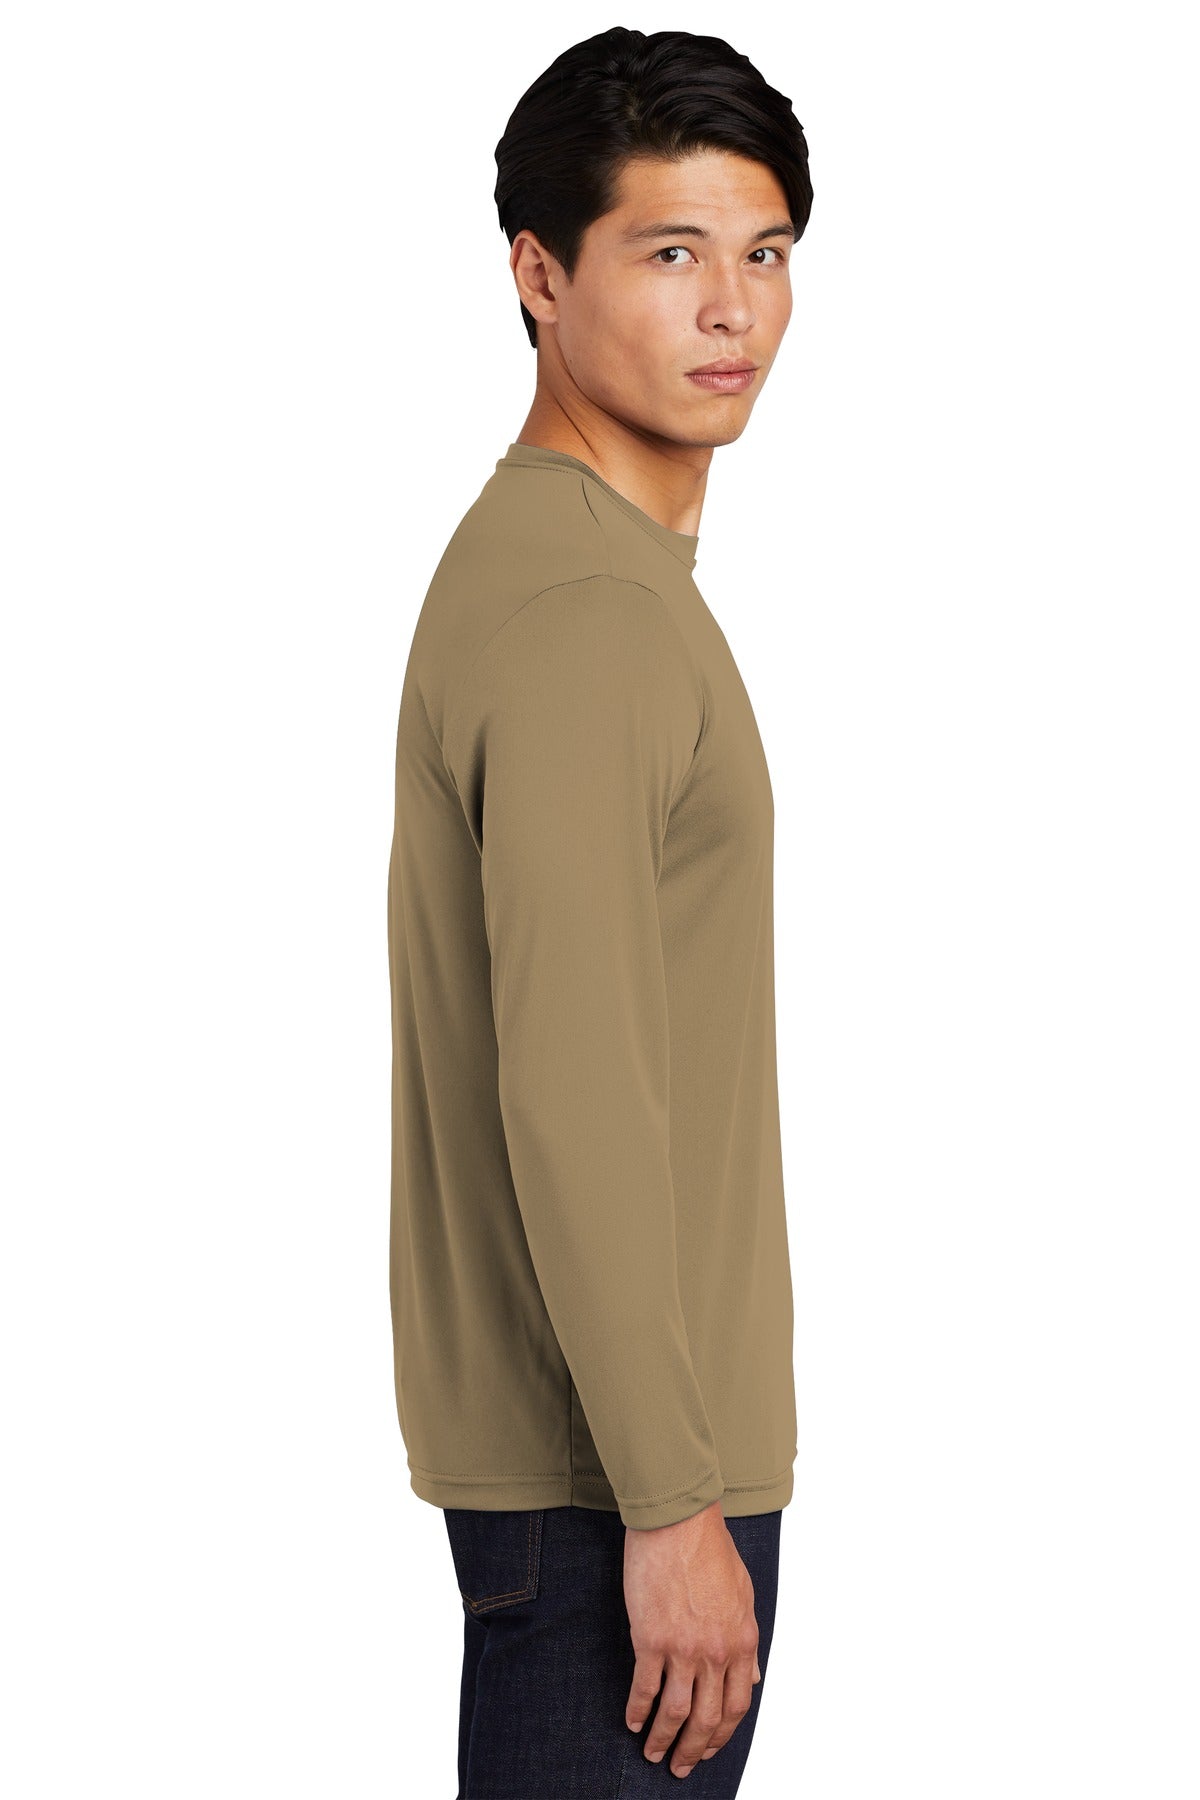 Sport-Tek® Long Sleeve PosiCharge® Competitor™ Tee. ST350LS [Coyote Brown] - DFW Impression